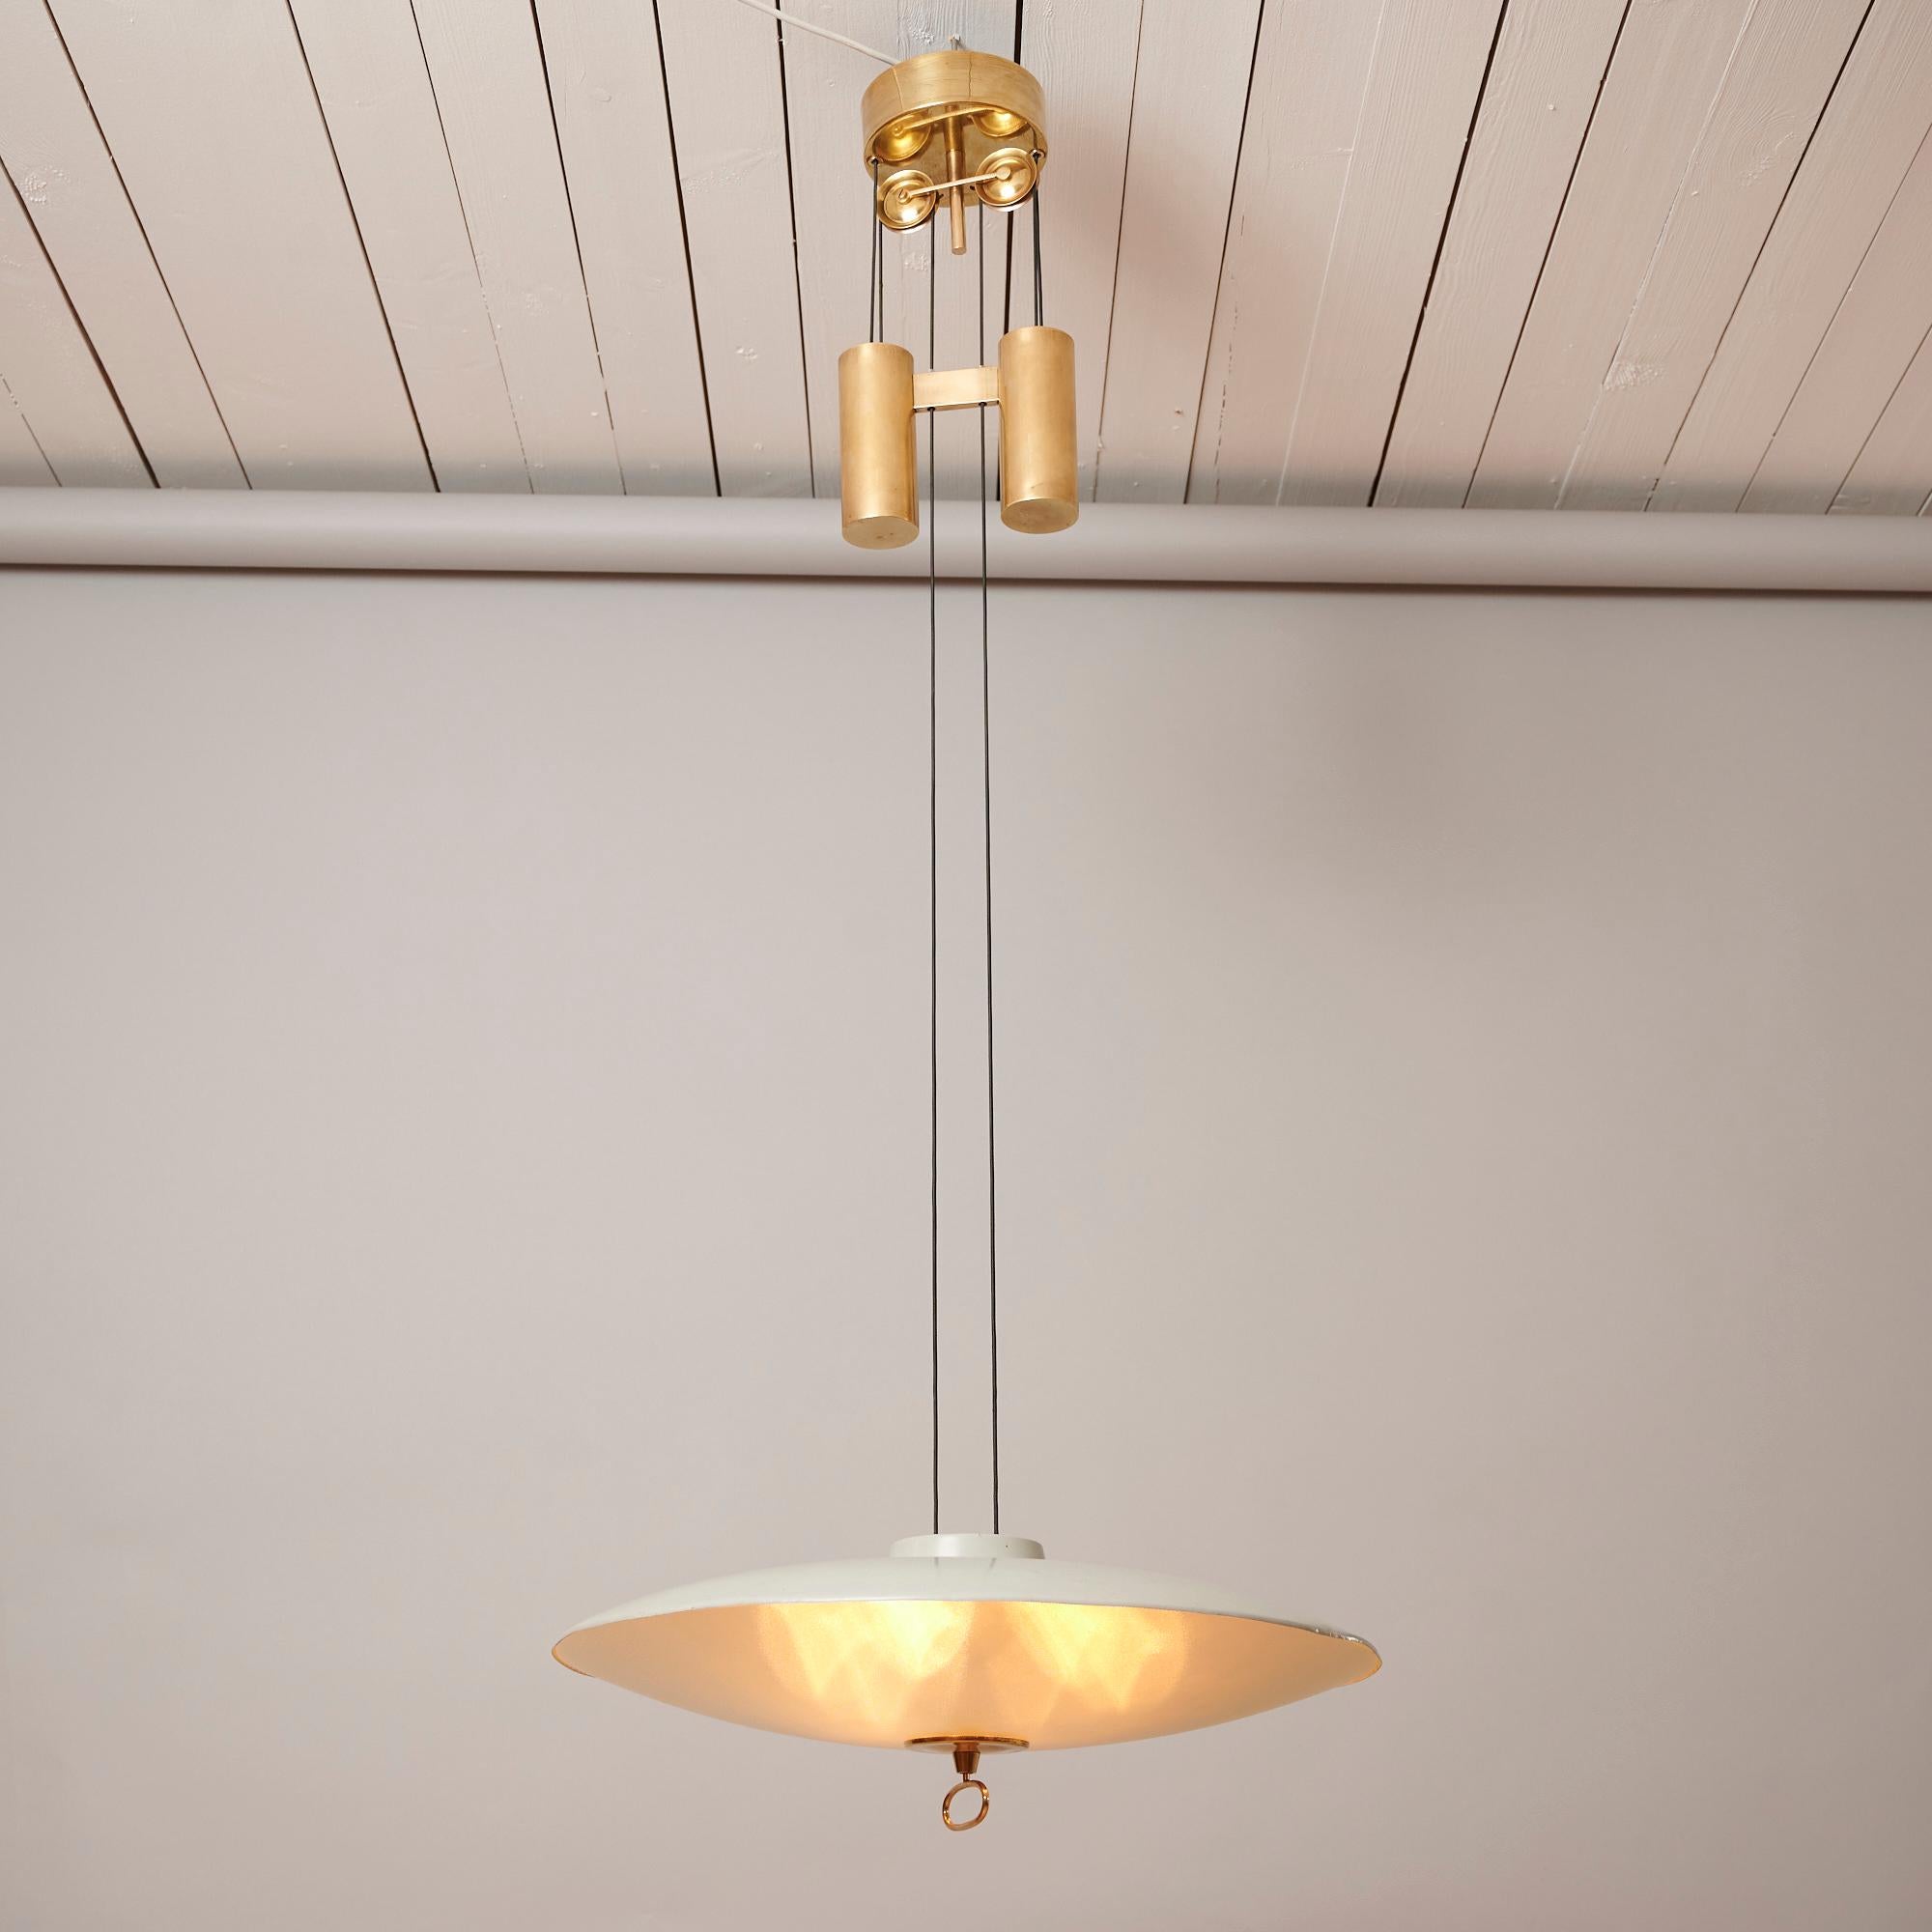 Rare Counterbalance chandelier by Max Ingrand For Fontana Arte c1954 In Good Condition For Sale In London, GB